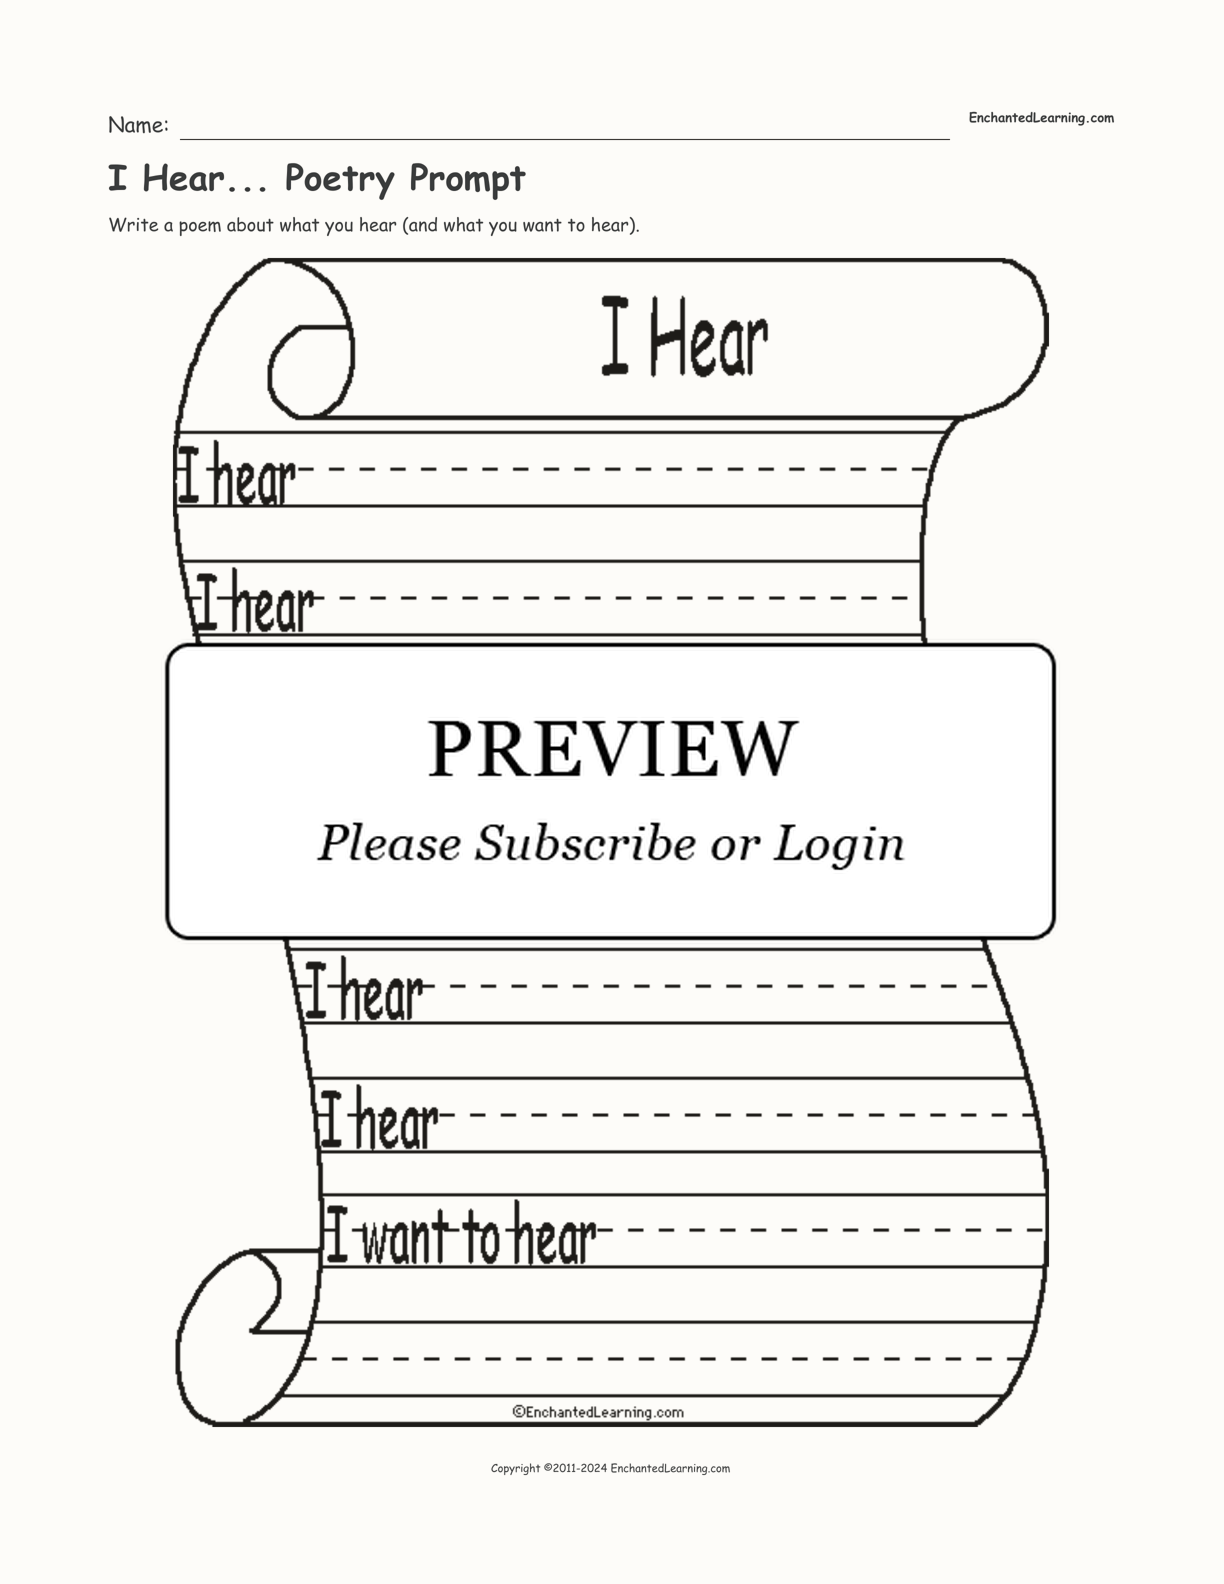 I Hear... Poetry Prompt interactive worksheet page 1